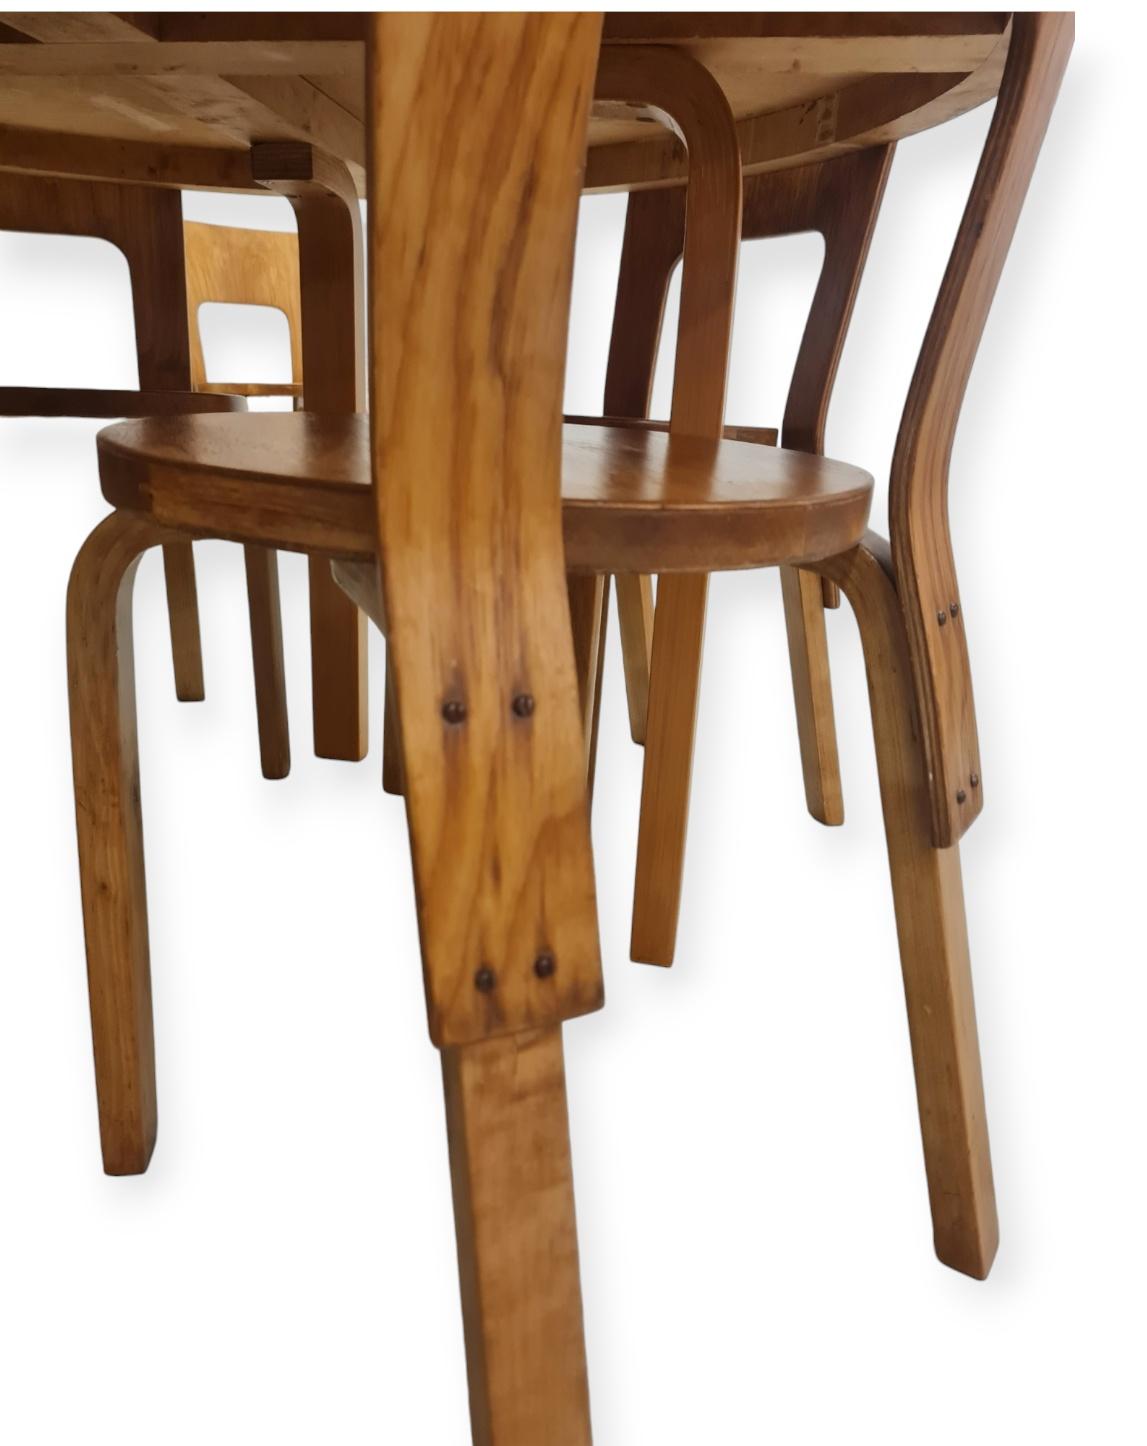 Alvar Aalto Dining Set with Lazy Susan and 6 Model 66 chairs, 1940s In Good Condition For Sale In Helsinki, FI